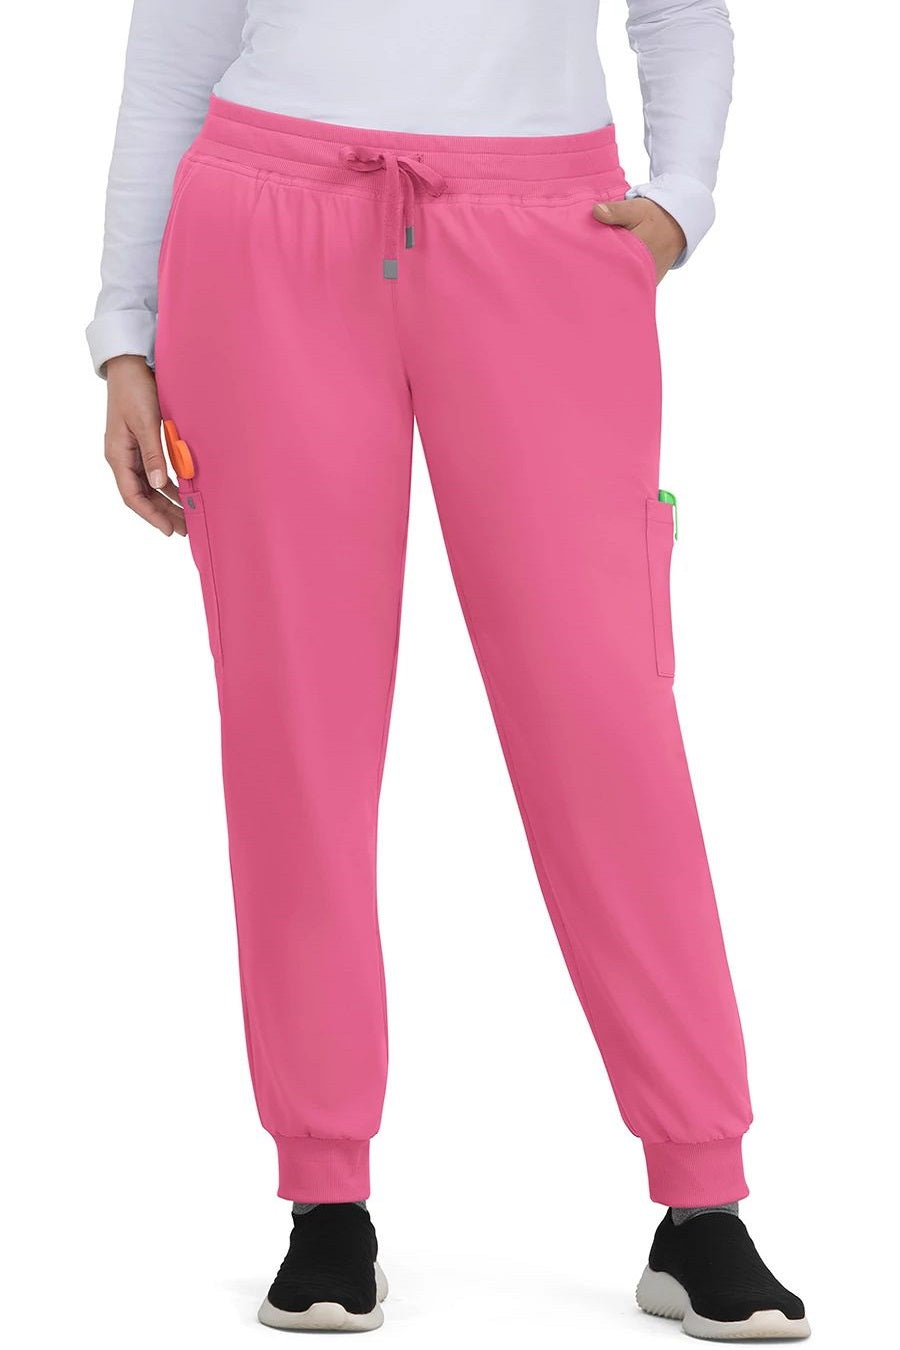 koi Scrub Pants Cureology Pulse Jogger in Carnation at Parker's Clothing and Shoes.